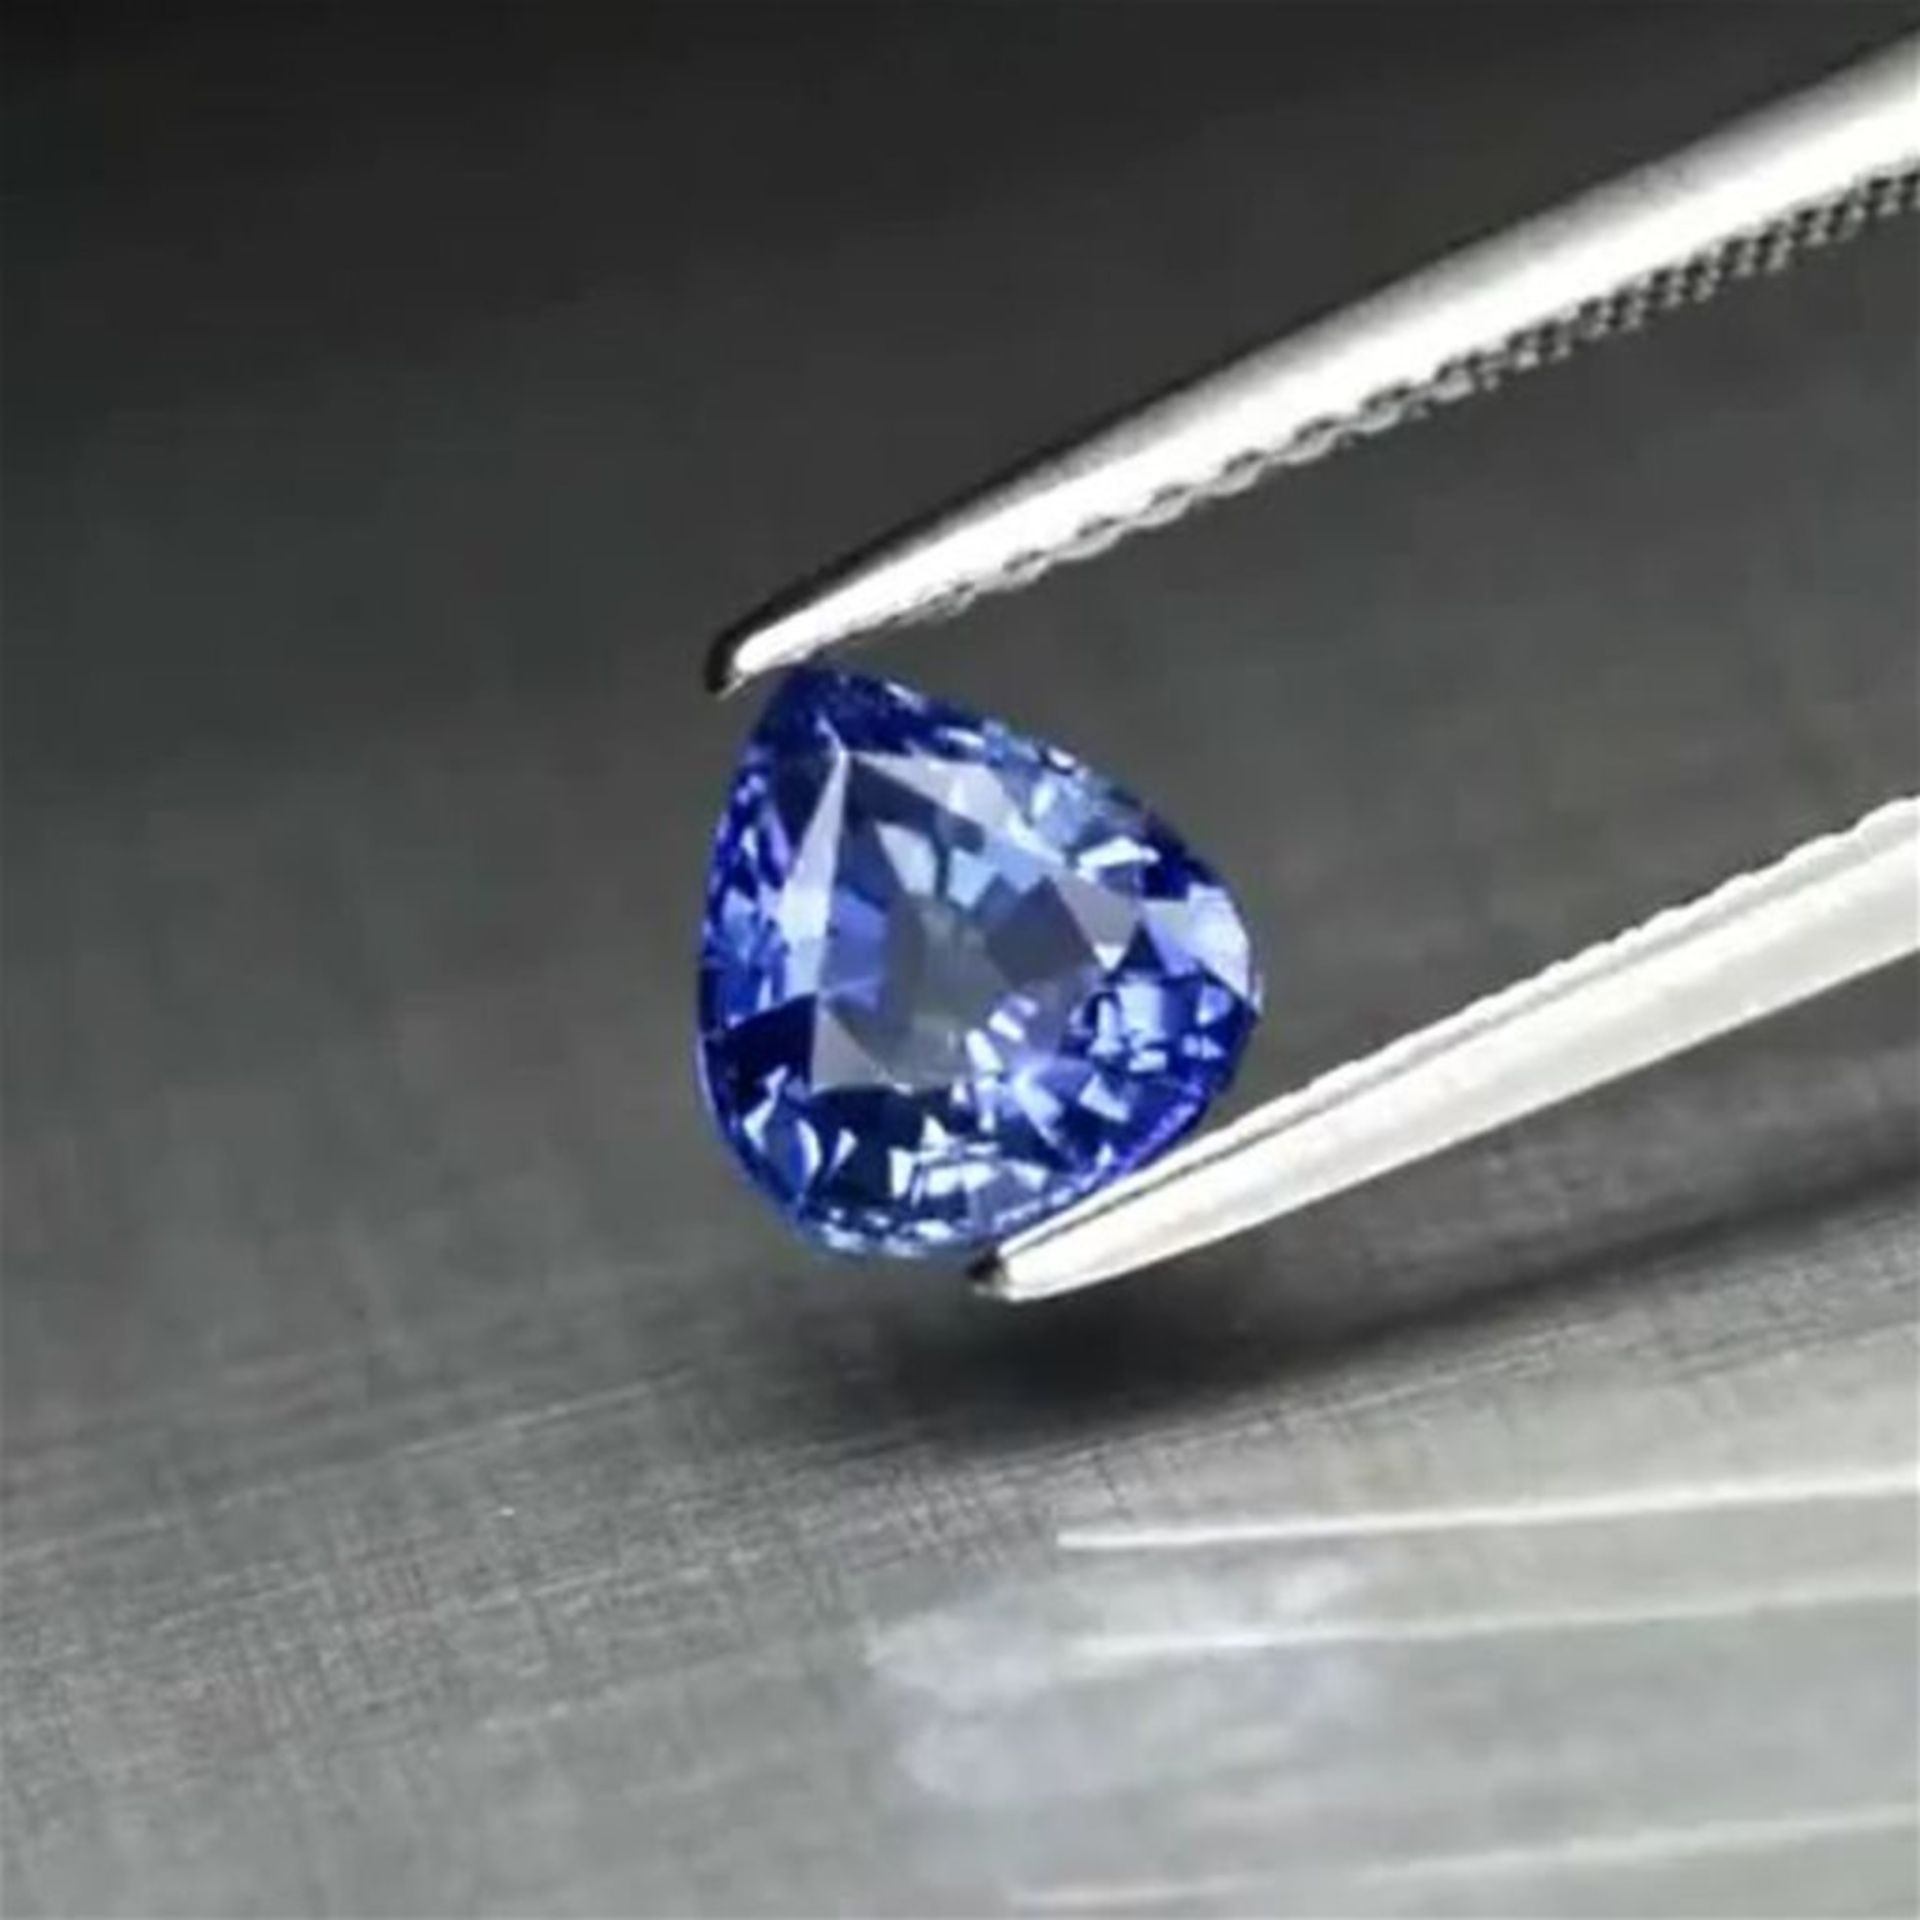 GIA Certified 1.23 ct. Blue Sapphire MADAGASCAR - Image 3 of 9